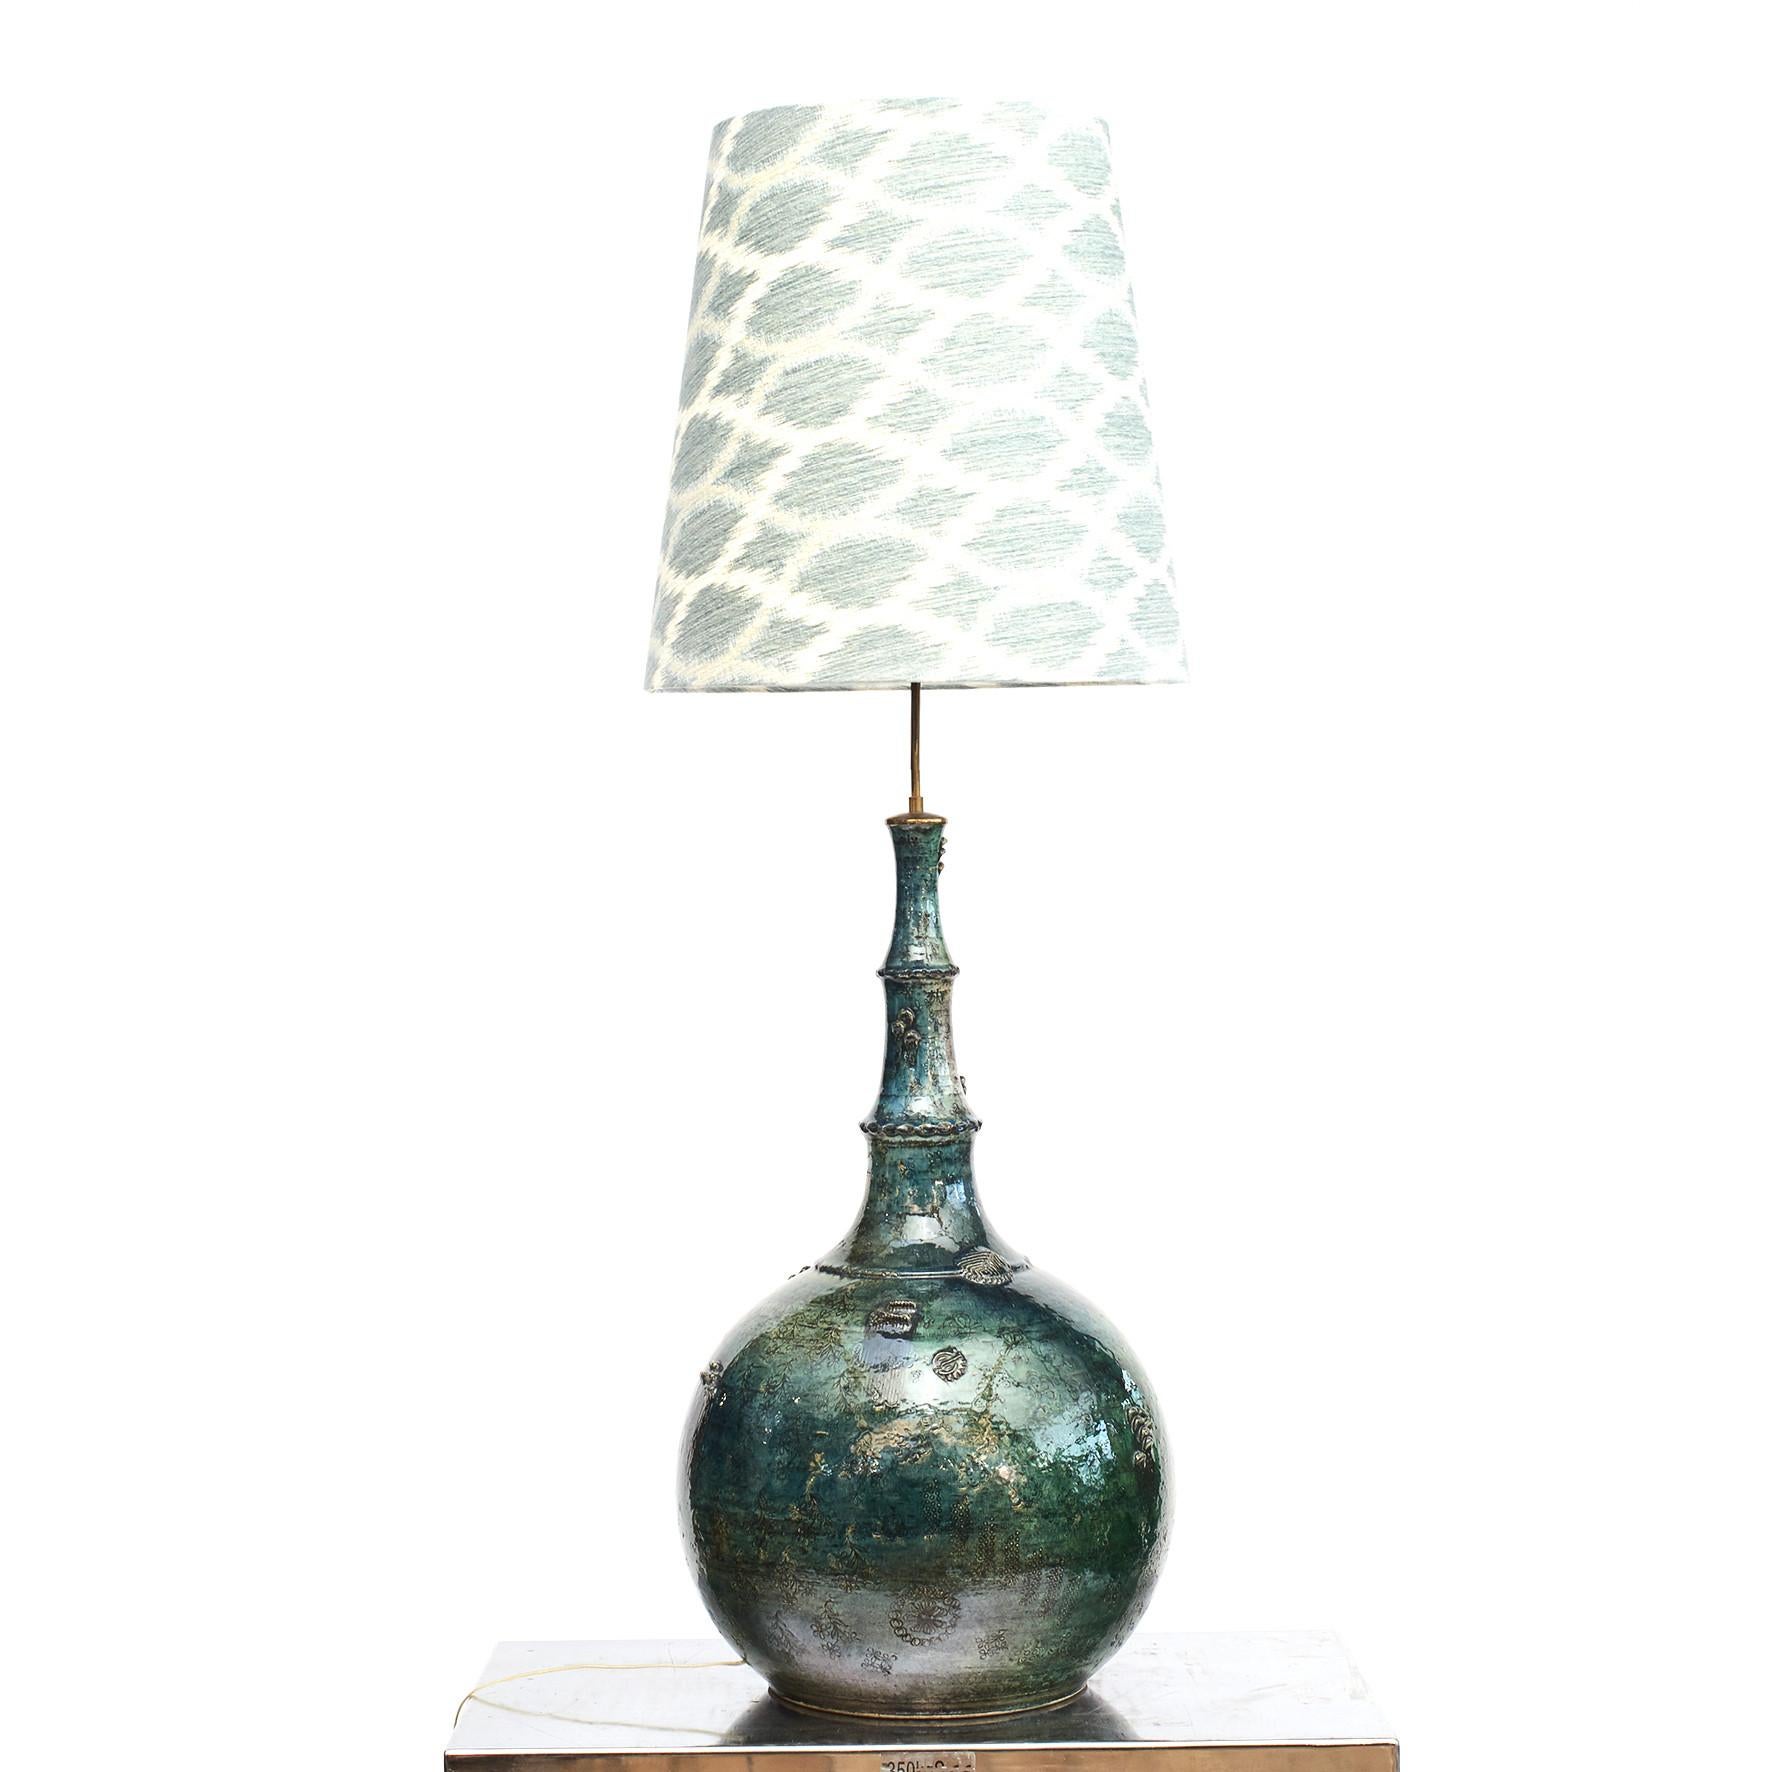 Bjørn Wiinblad 1918-2006.
Colossal 'one of a kind' ceramic lamp by Bjorn Wiinblad. Glaze in polychrome shades of blue and green. Decorated with foliage, grapes etc.
New lampshade in ikat fabric from Jane Churchill.
A very beautiful and decorative